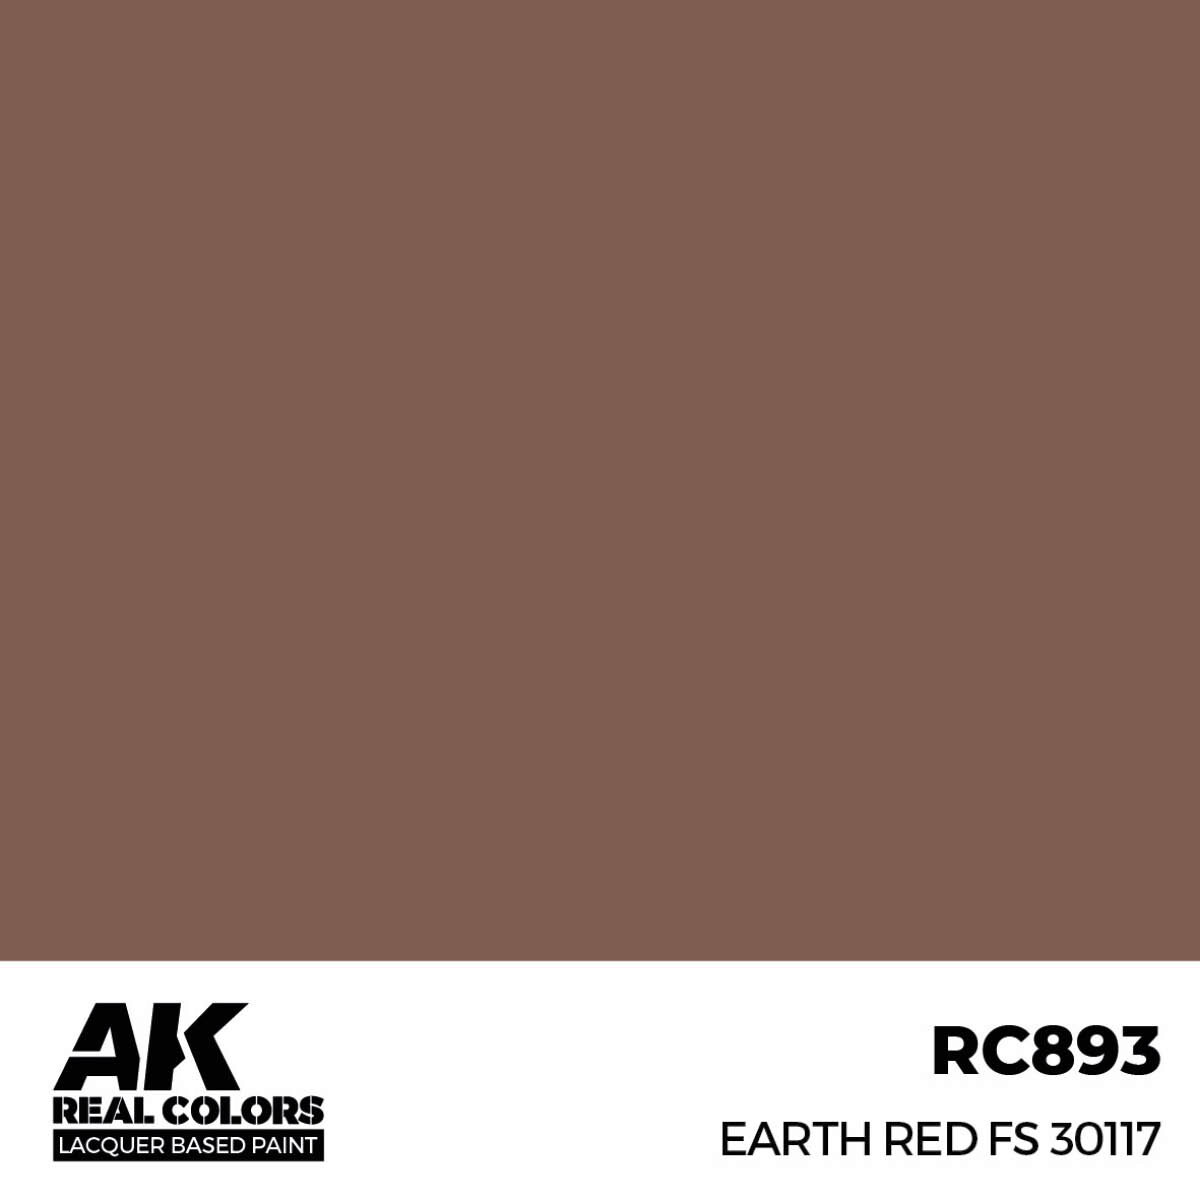 AK RC893 Real Colors Earth Red FS 30117 17 ml.